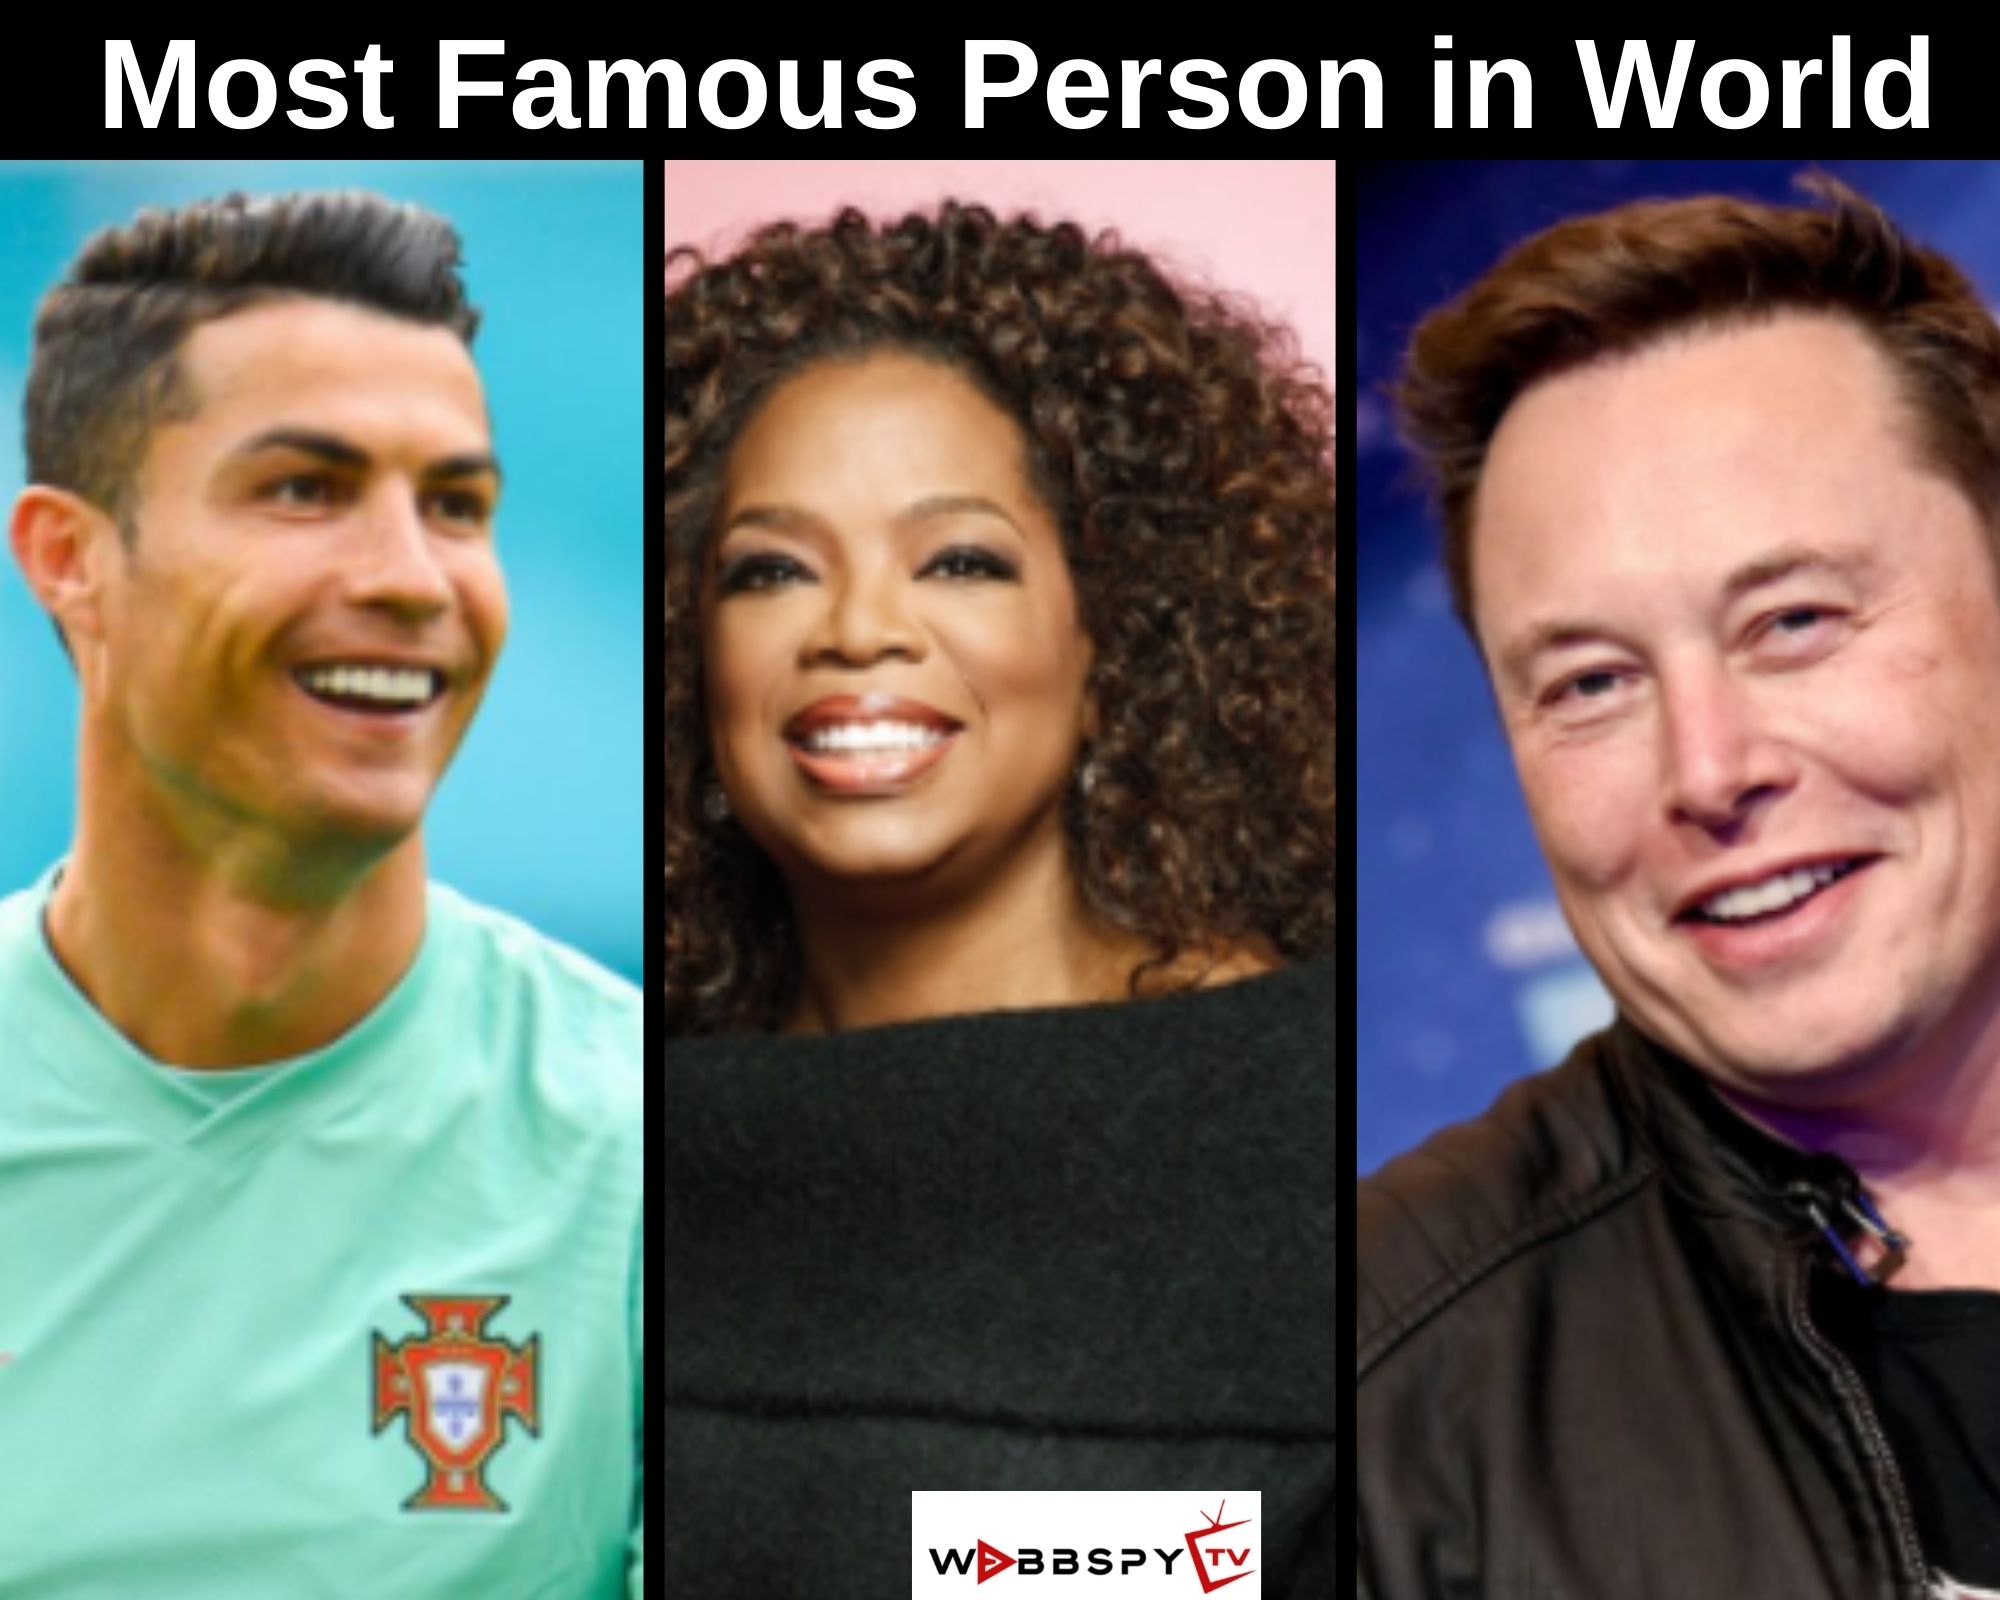 Top 10 Most Famous Person in World 2021